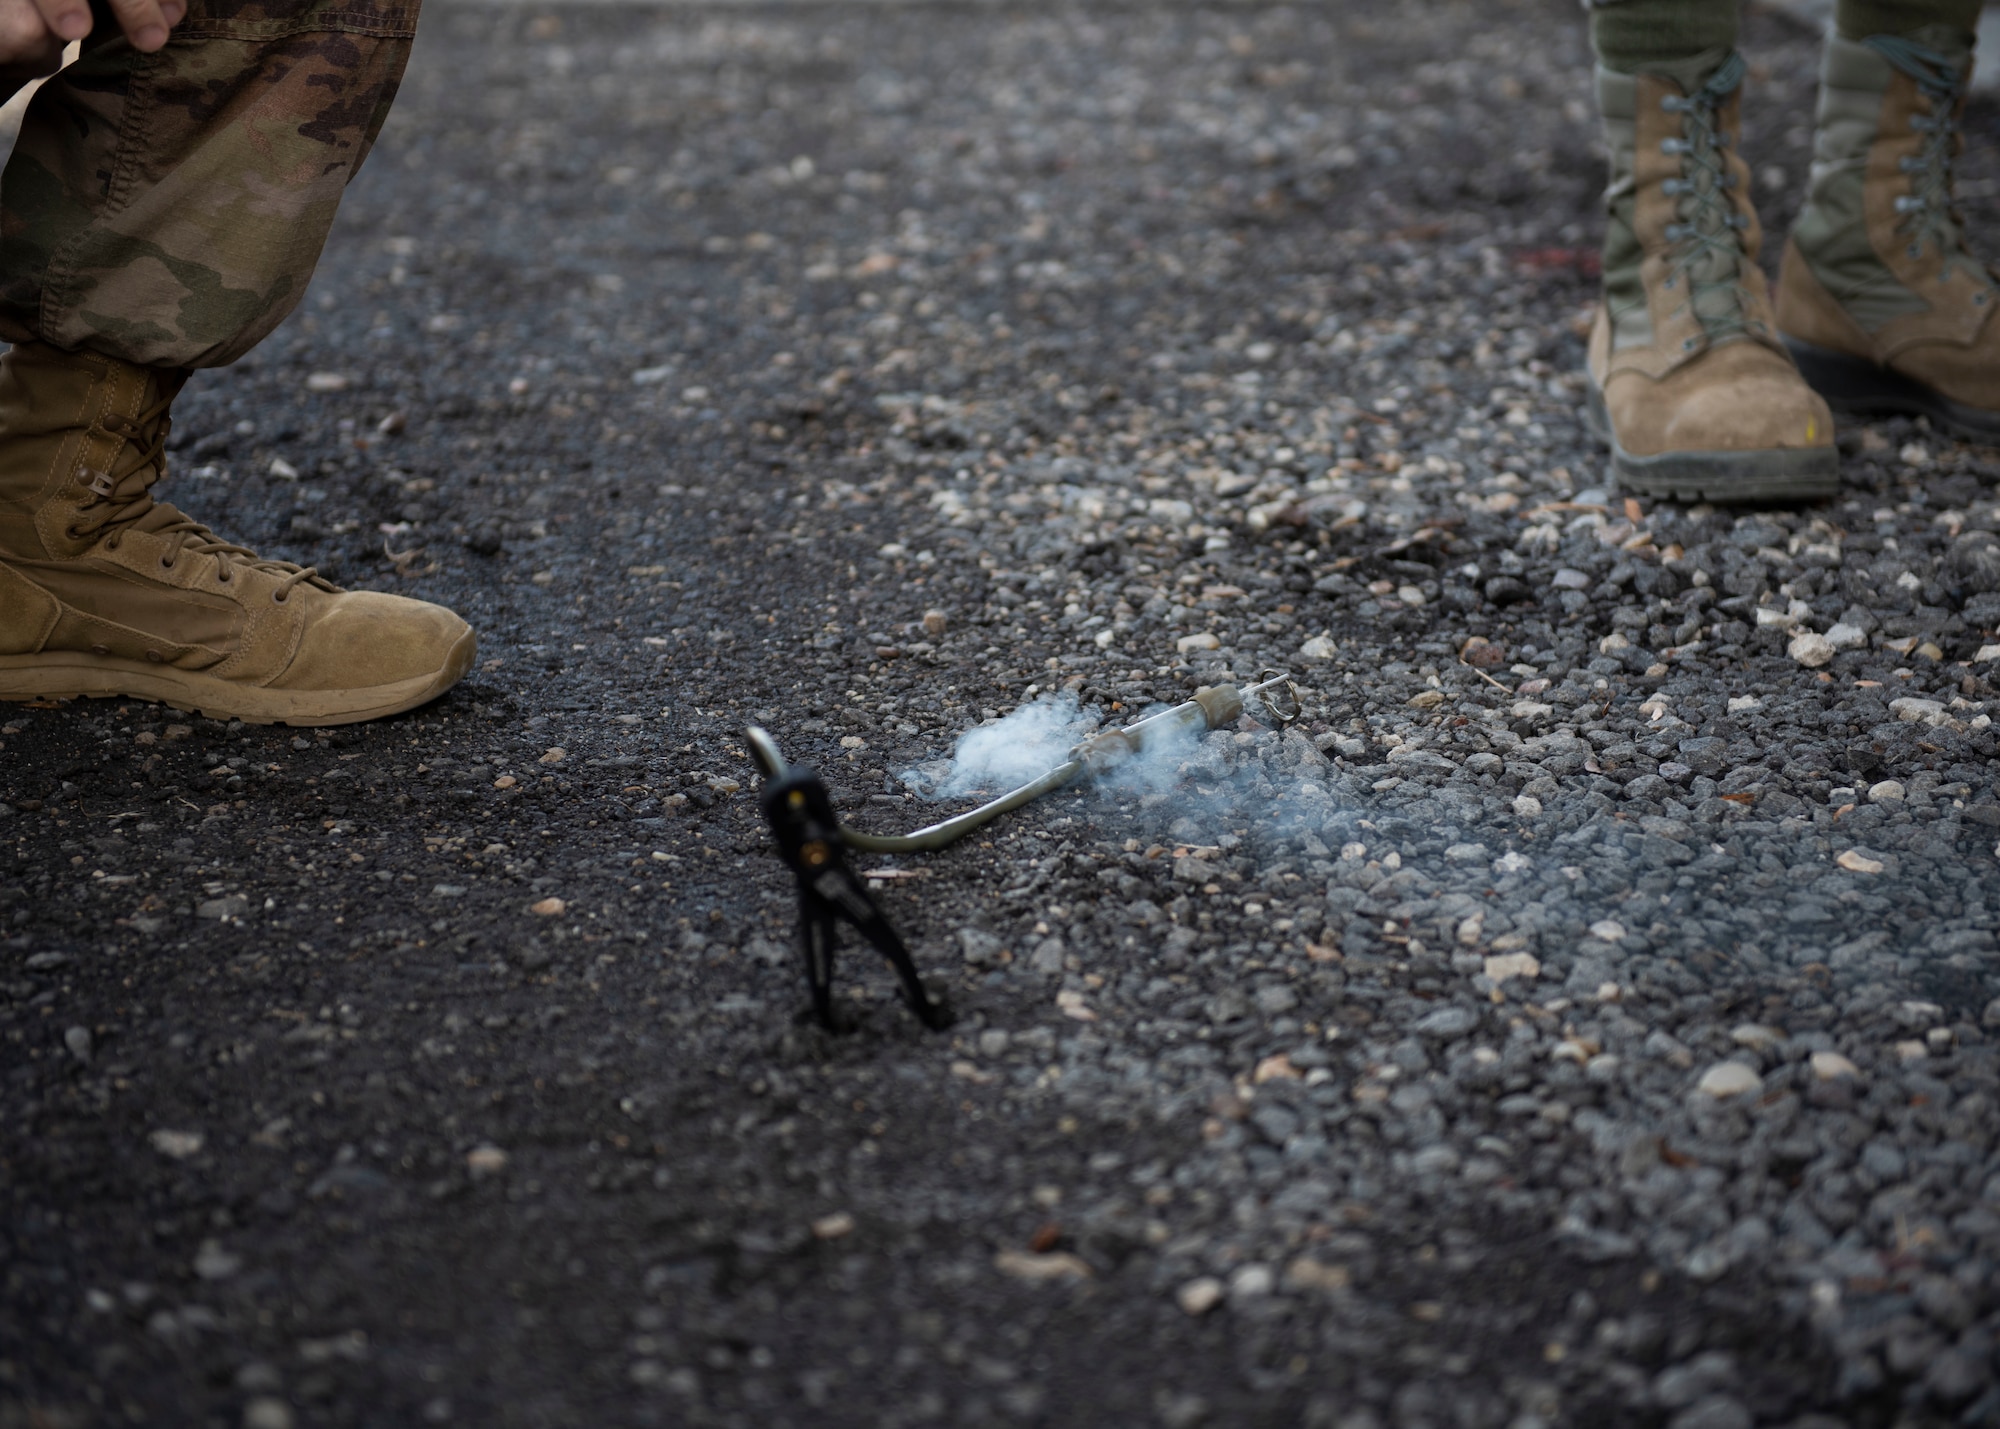 A fuse burns during a time fuse burn test at a multi-capable Airman training, Jan. 23, 2020, at Mountain Home Air Force Base, Idaho. These fuses are used by explosive ordinance disposal technicians to build counter-detonation explosives downrange. (U.S. Air Force photo by Senior Airman Tyrell Hall